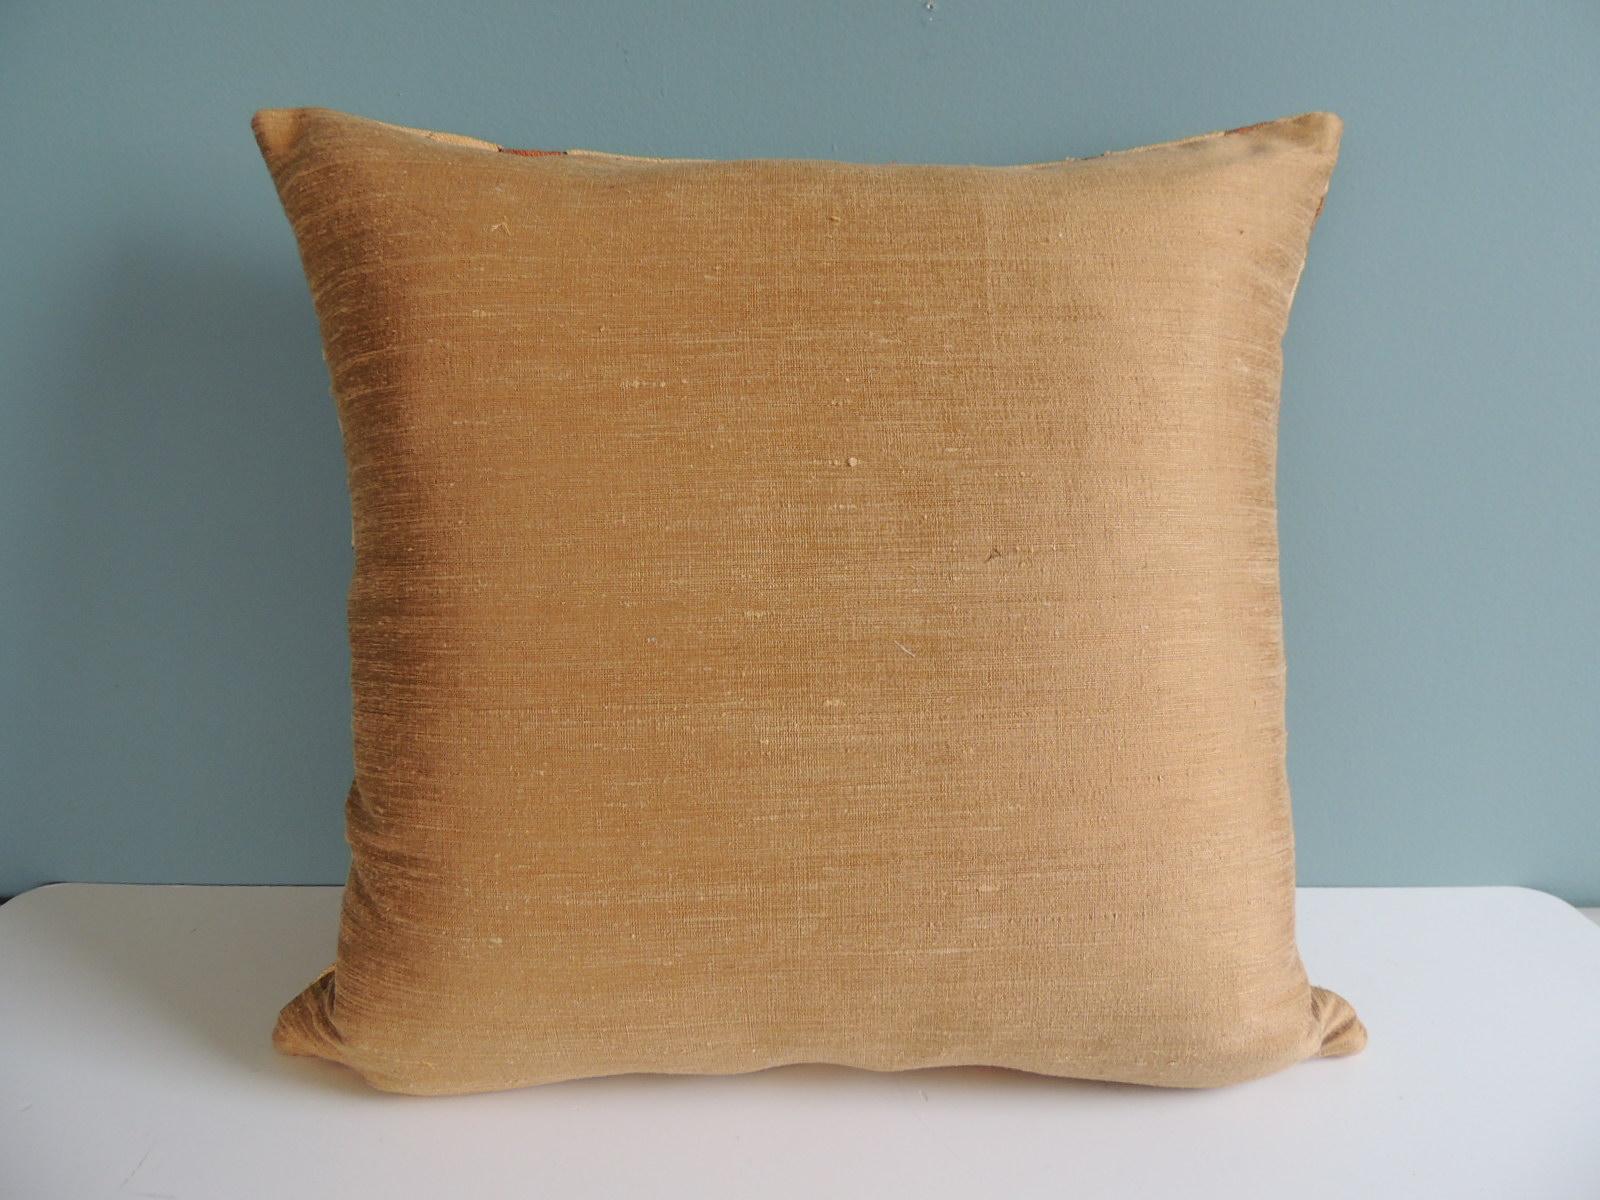 Late 20th Century Vintage Tan and Camel African Raffia Kuba Textile Square Decorative Pillow